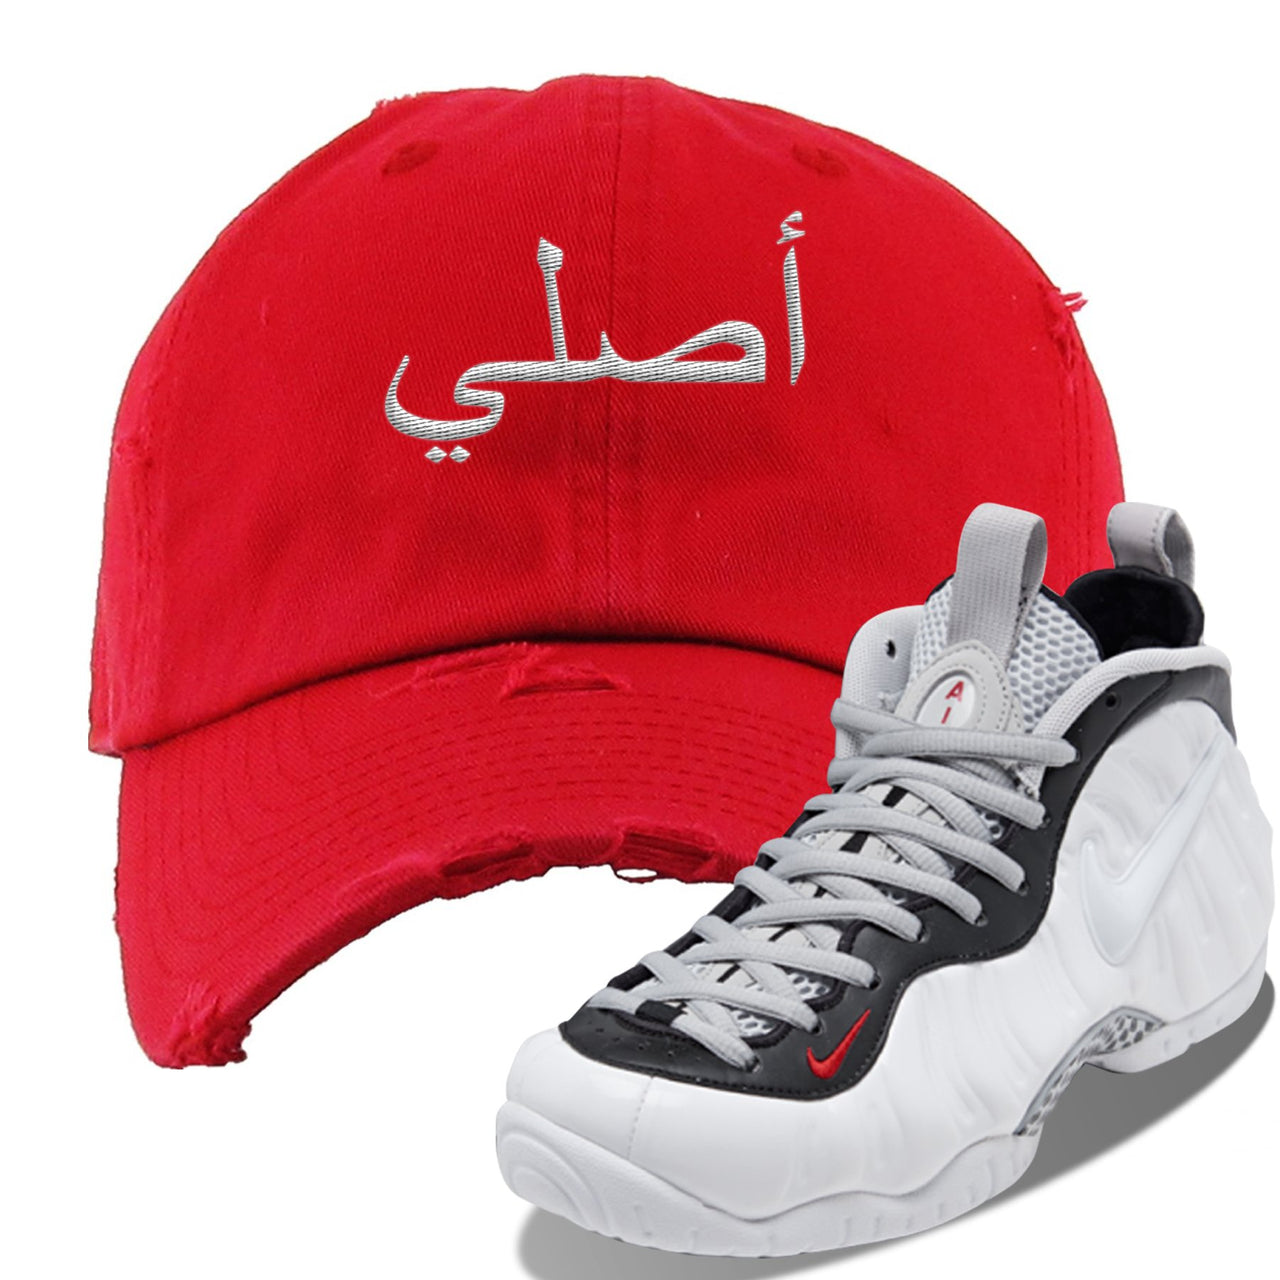 Foamposite Pro White Black University Red Sneaker Red Distressed Dad Hat | Hat to match Nike Air Foamposite Pro White Black University Red Shoes | Original Arabic